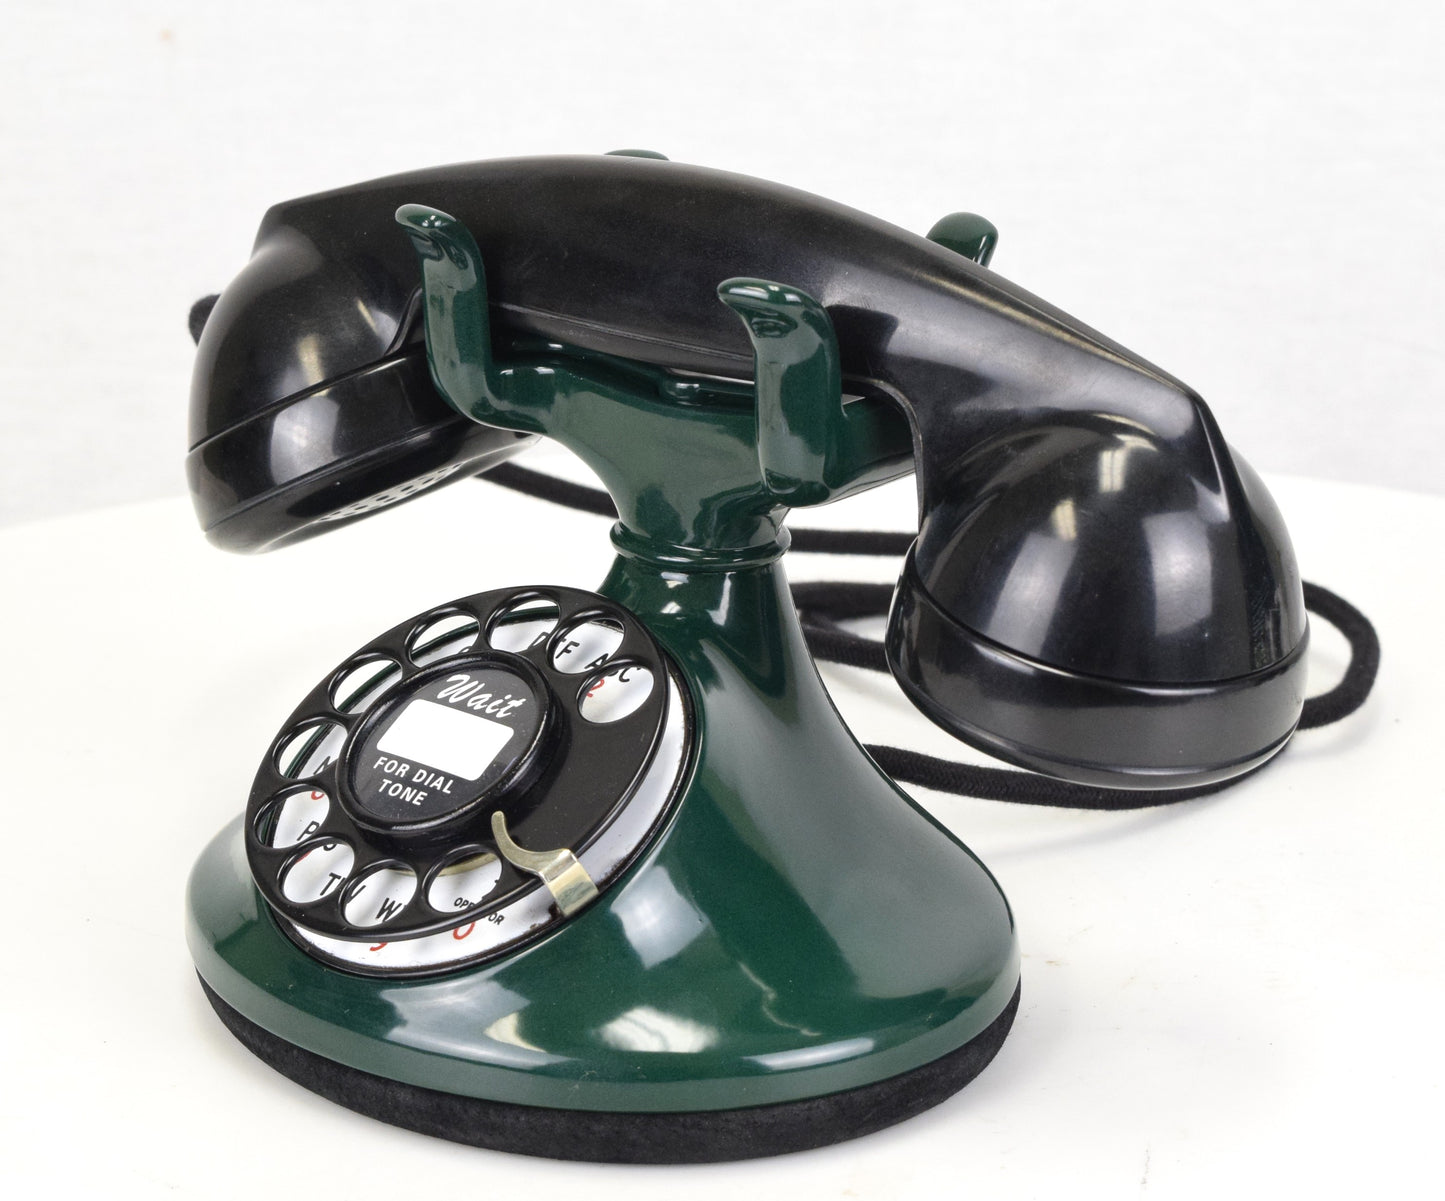 Western Electric 202 - Forest Green